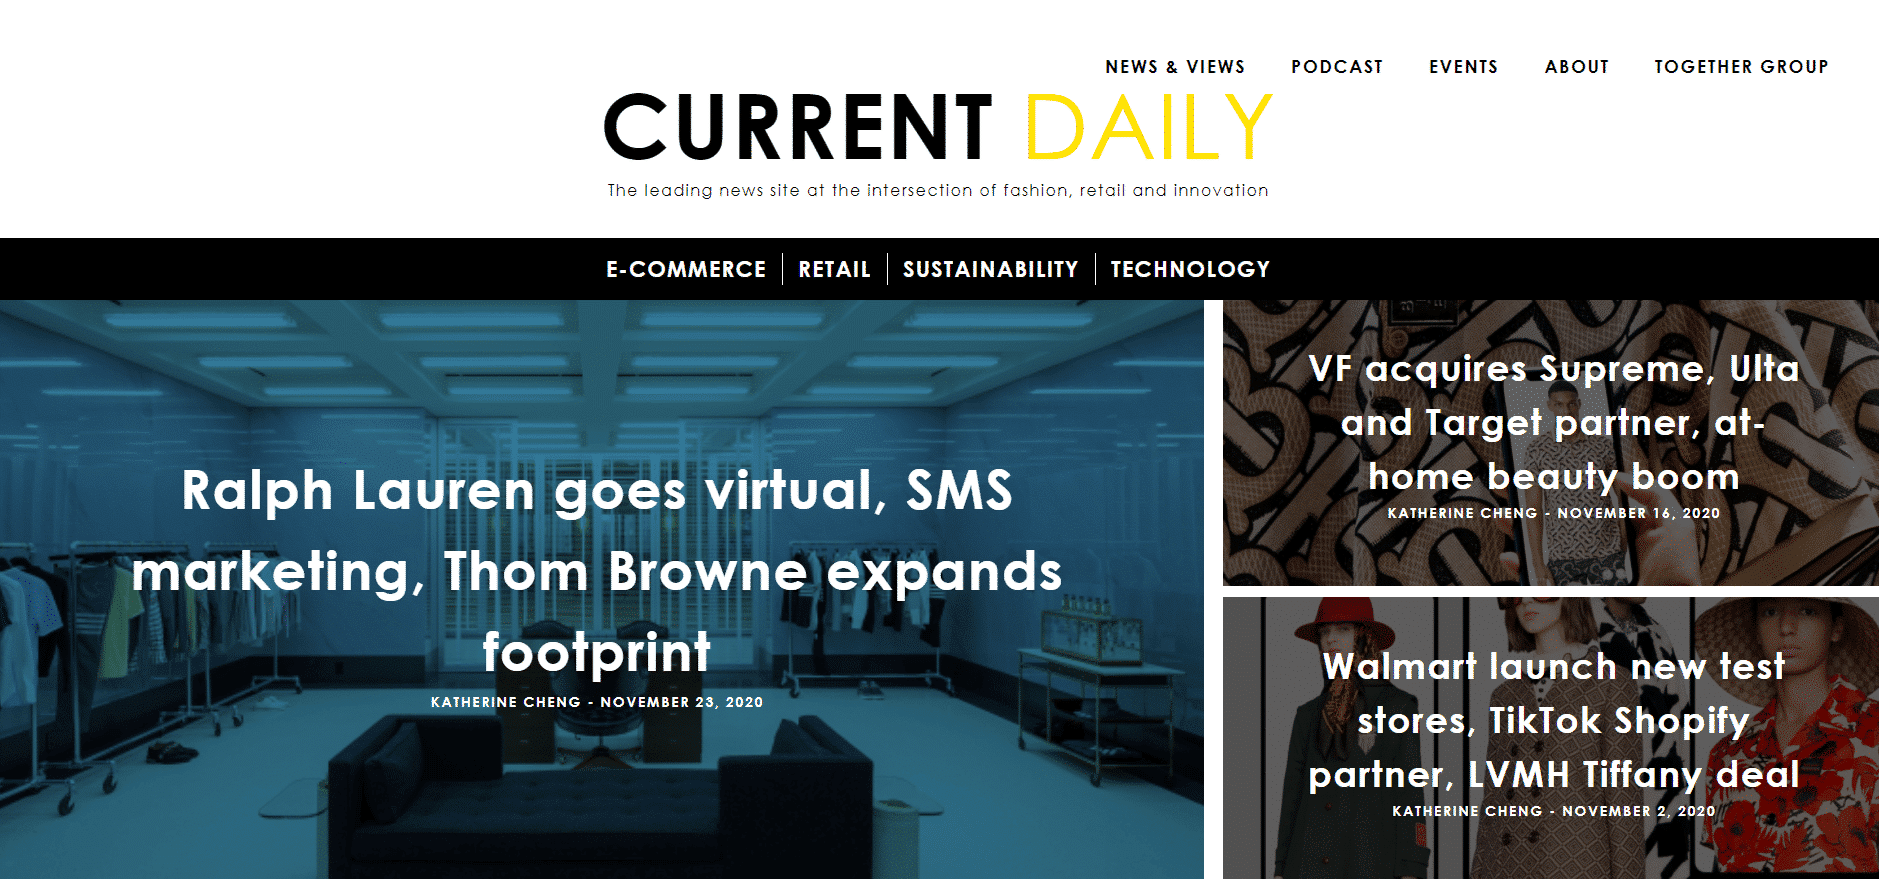 the-current daily